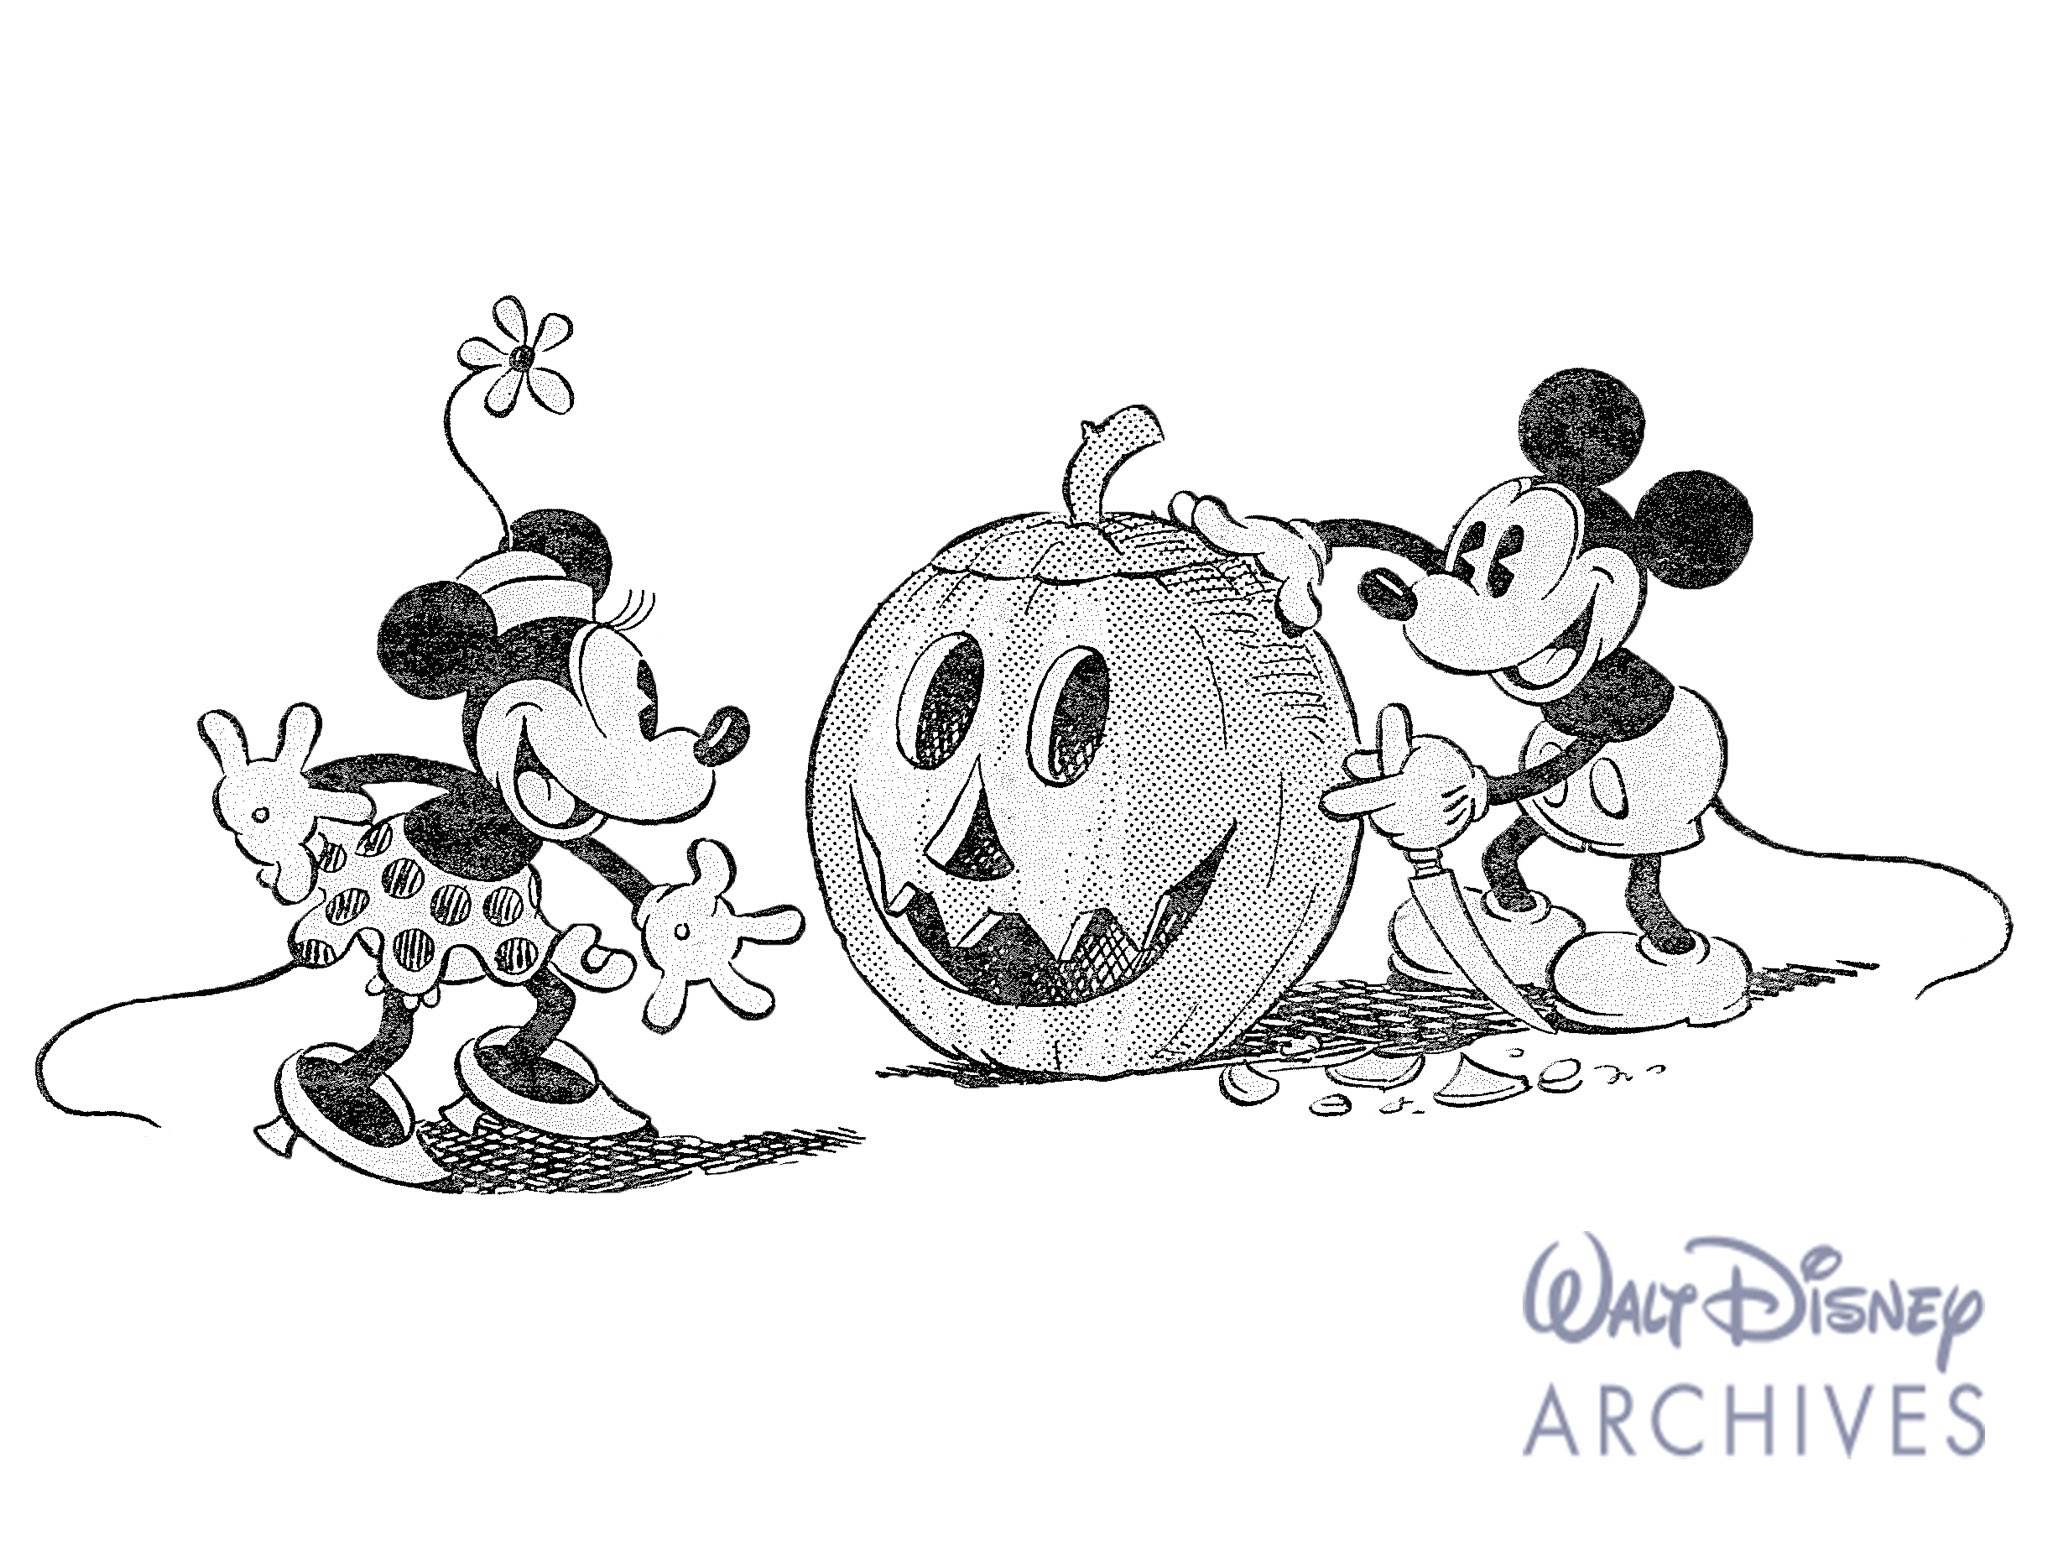 Walt disney archives on x mickey and minnie are carving up some halloween fun in this publicity art from a issue of the official bulletin of the mickey mouse club halloween